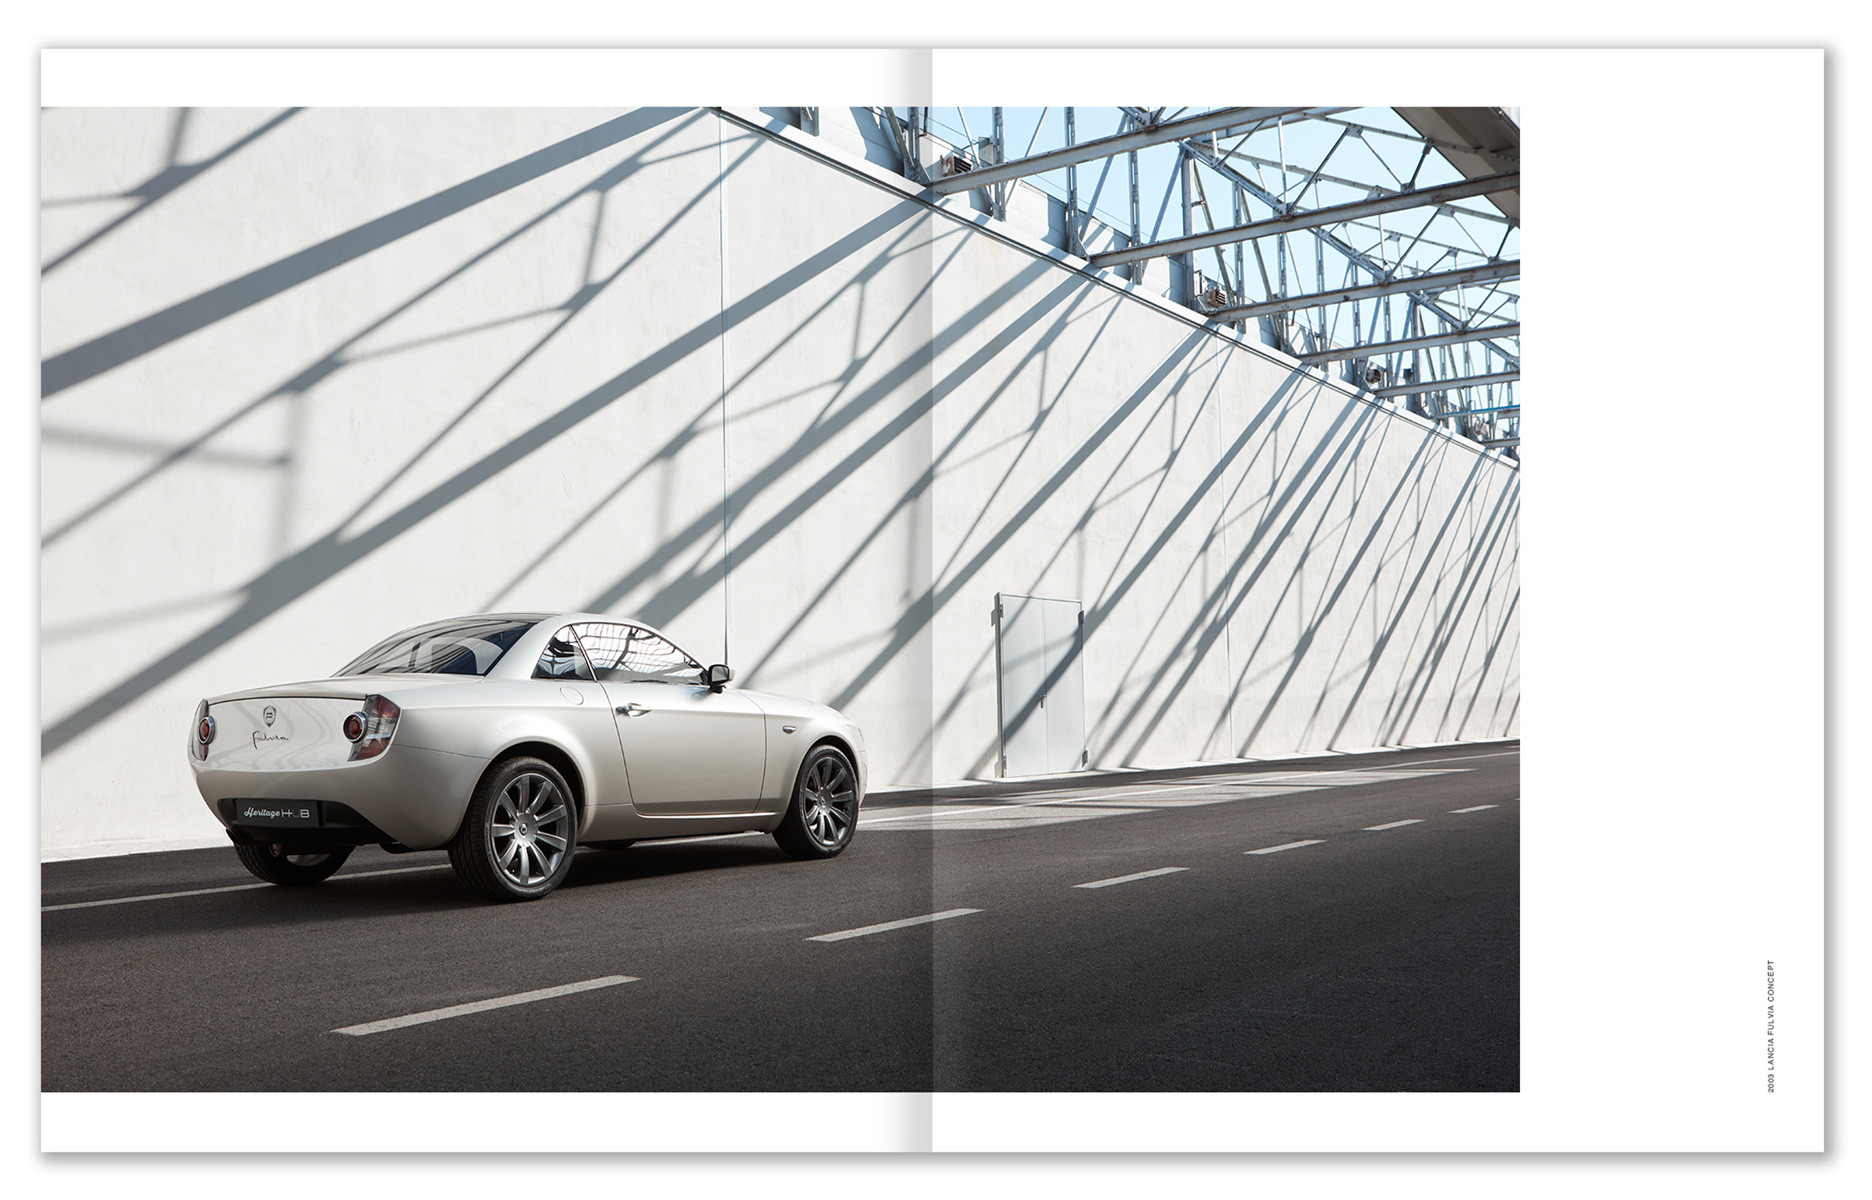 Beau Livre Made in Italy ode photographique au design automobile italien - the good life